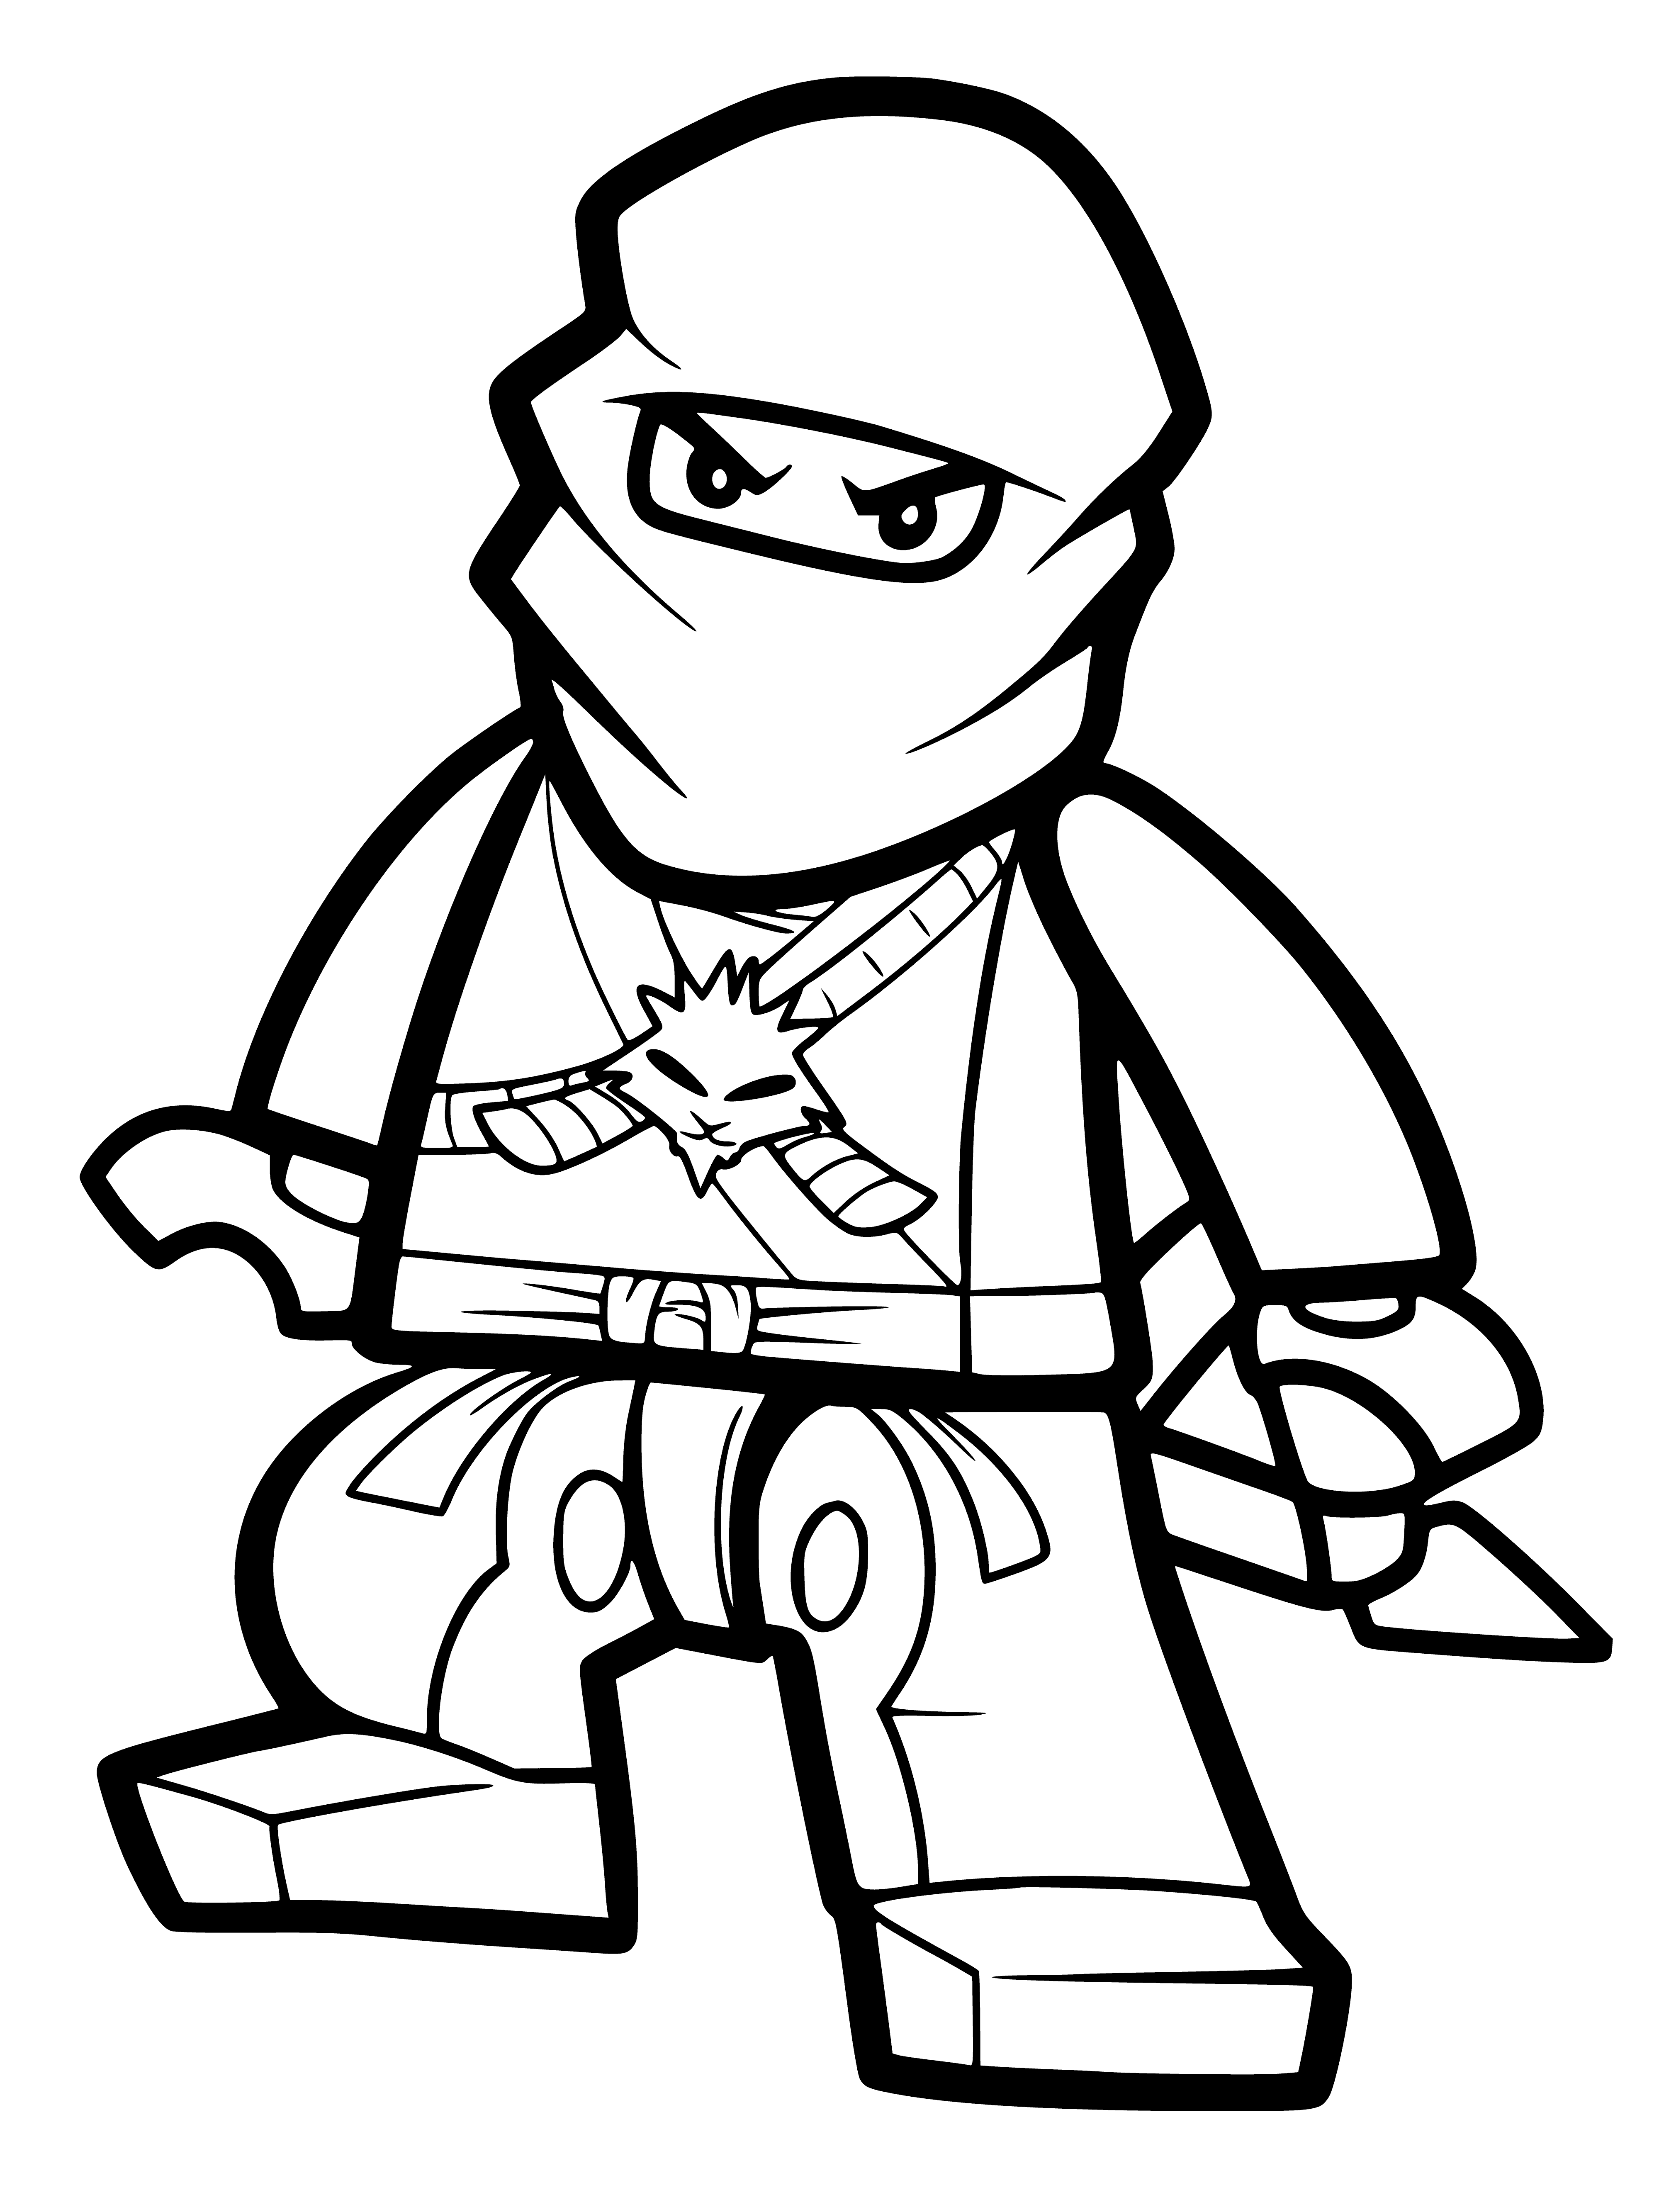 coloring page: Ninja figure made of Lego blocks wearing a black ninja suit and red belt, red scarf, black mask, and hood, holding a katana sword.